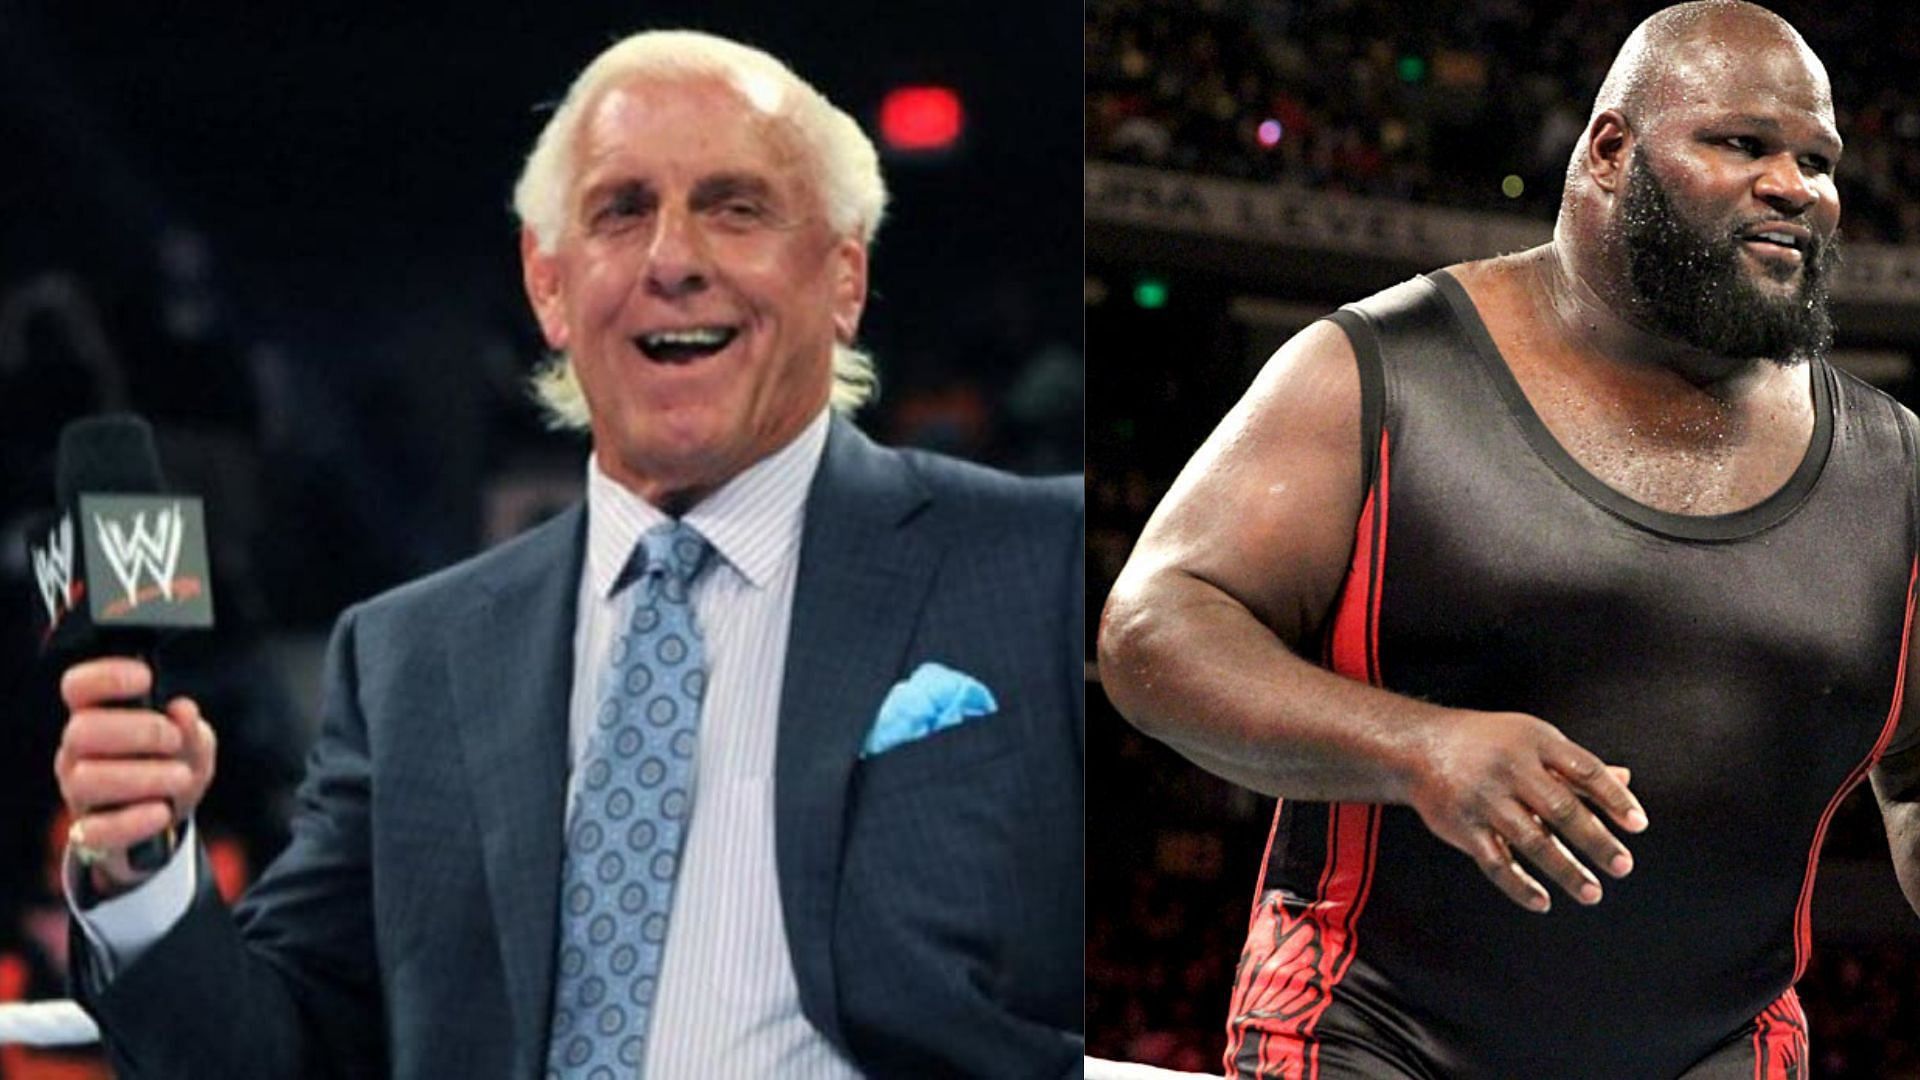 Ric Flair (L) and Mark Henry (R) are no longer with WWE.